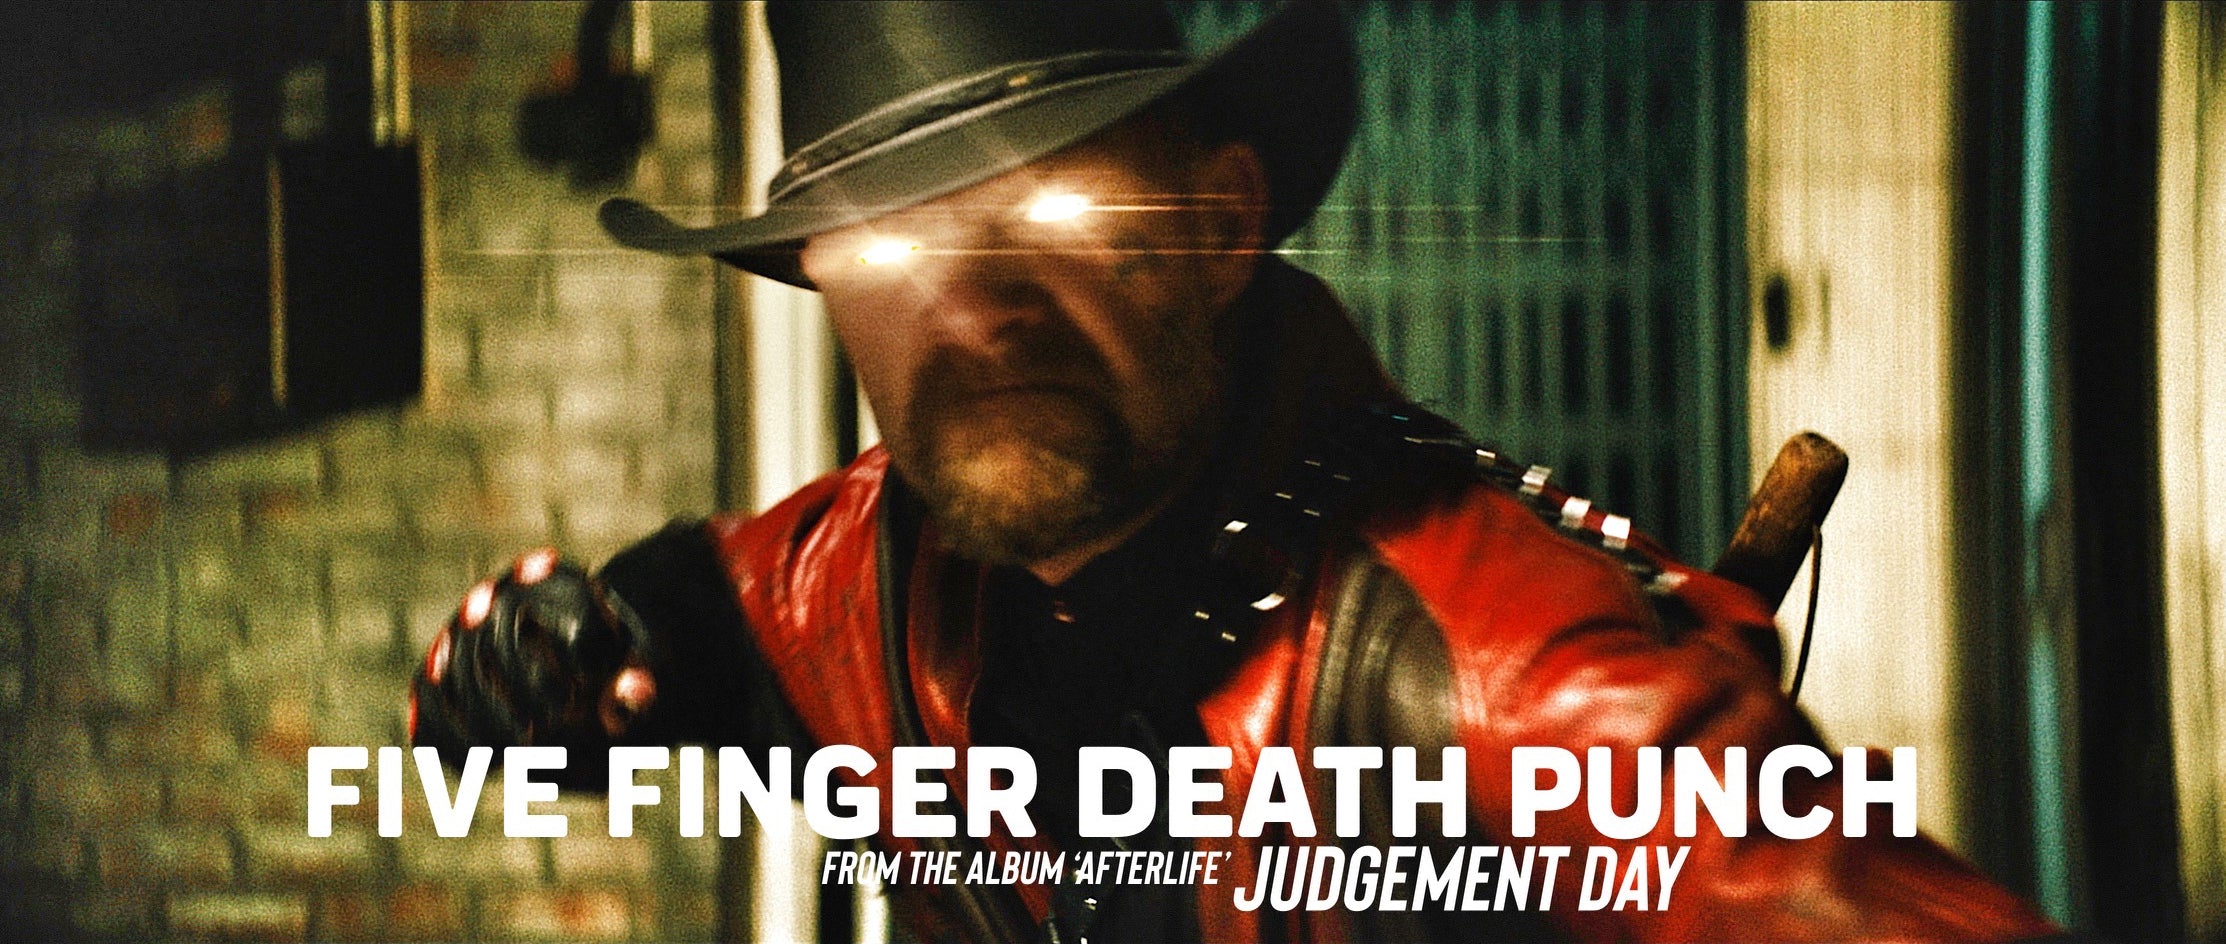 5FDP presents 'Judgement Day’ - Official Music Video is out now!